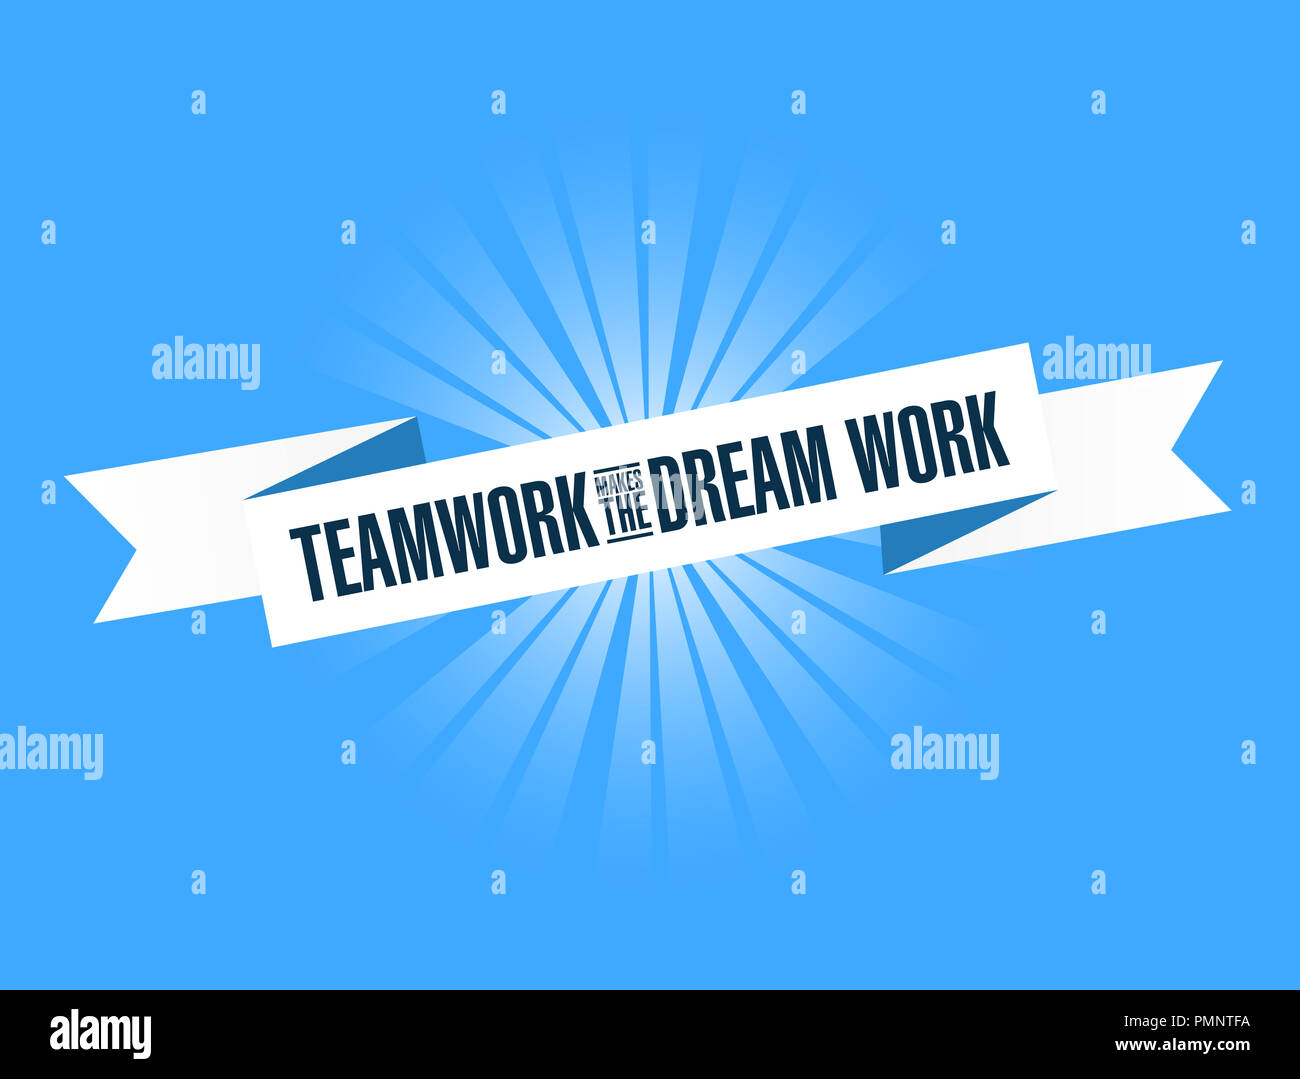 Teamwork makes the dream work bright ribbon message isolated over a blue background Stock Photo